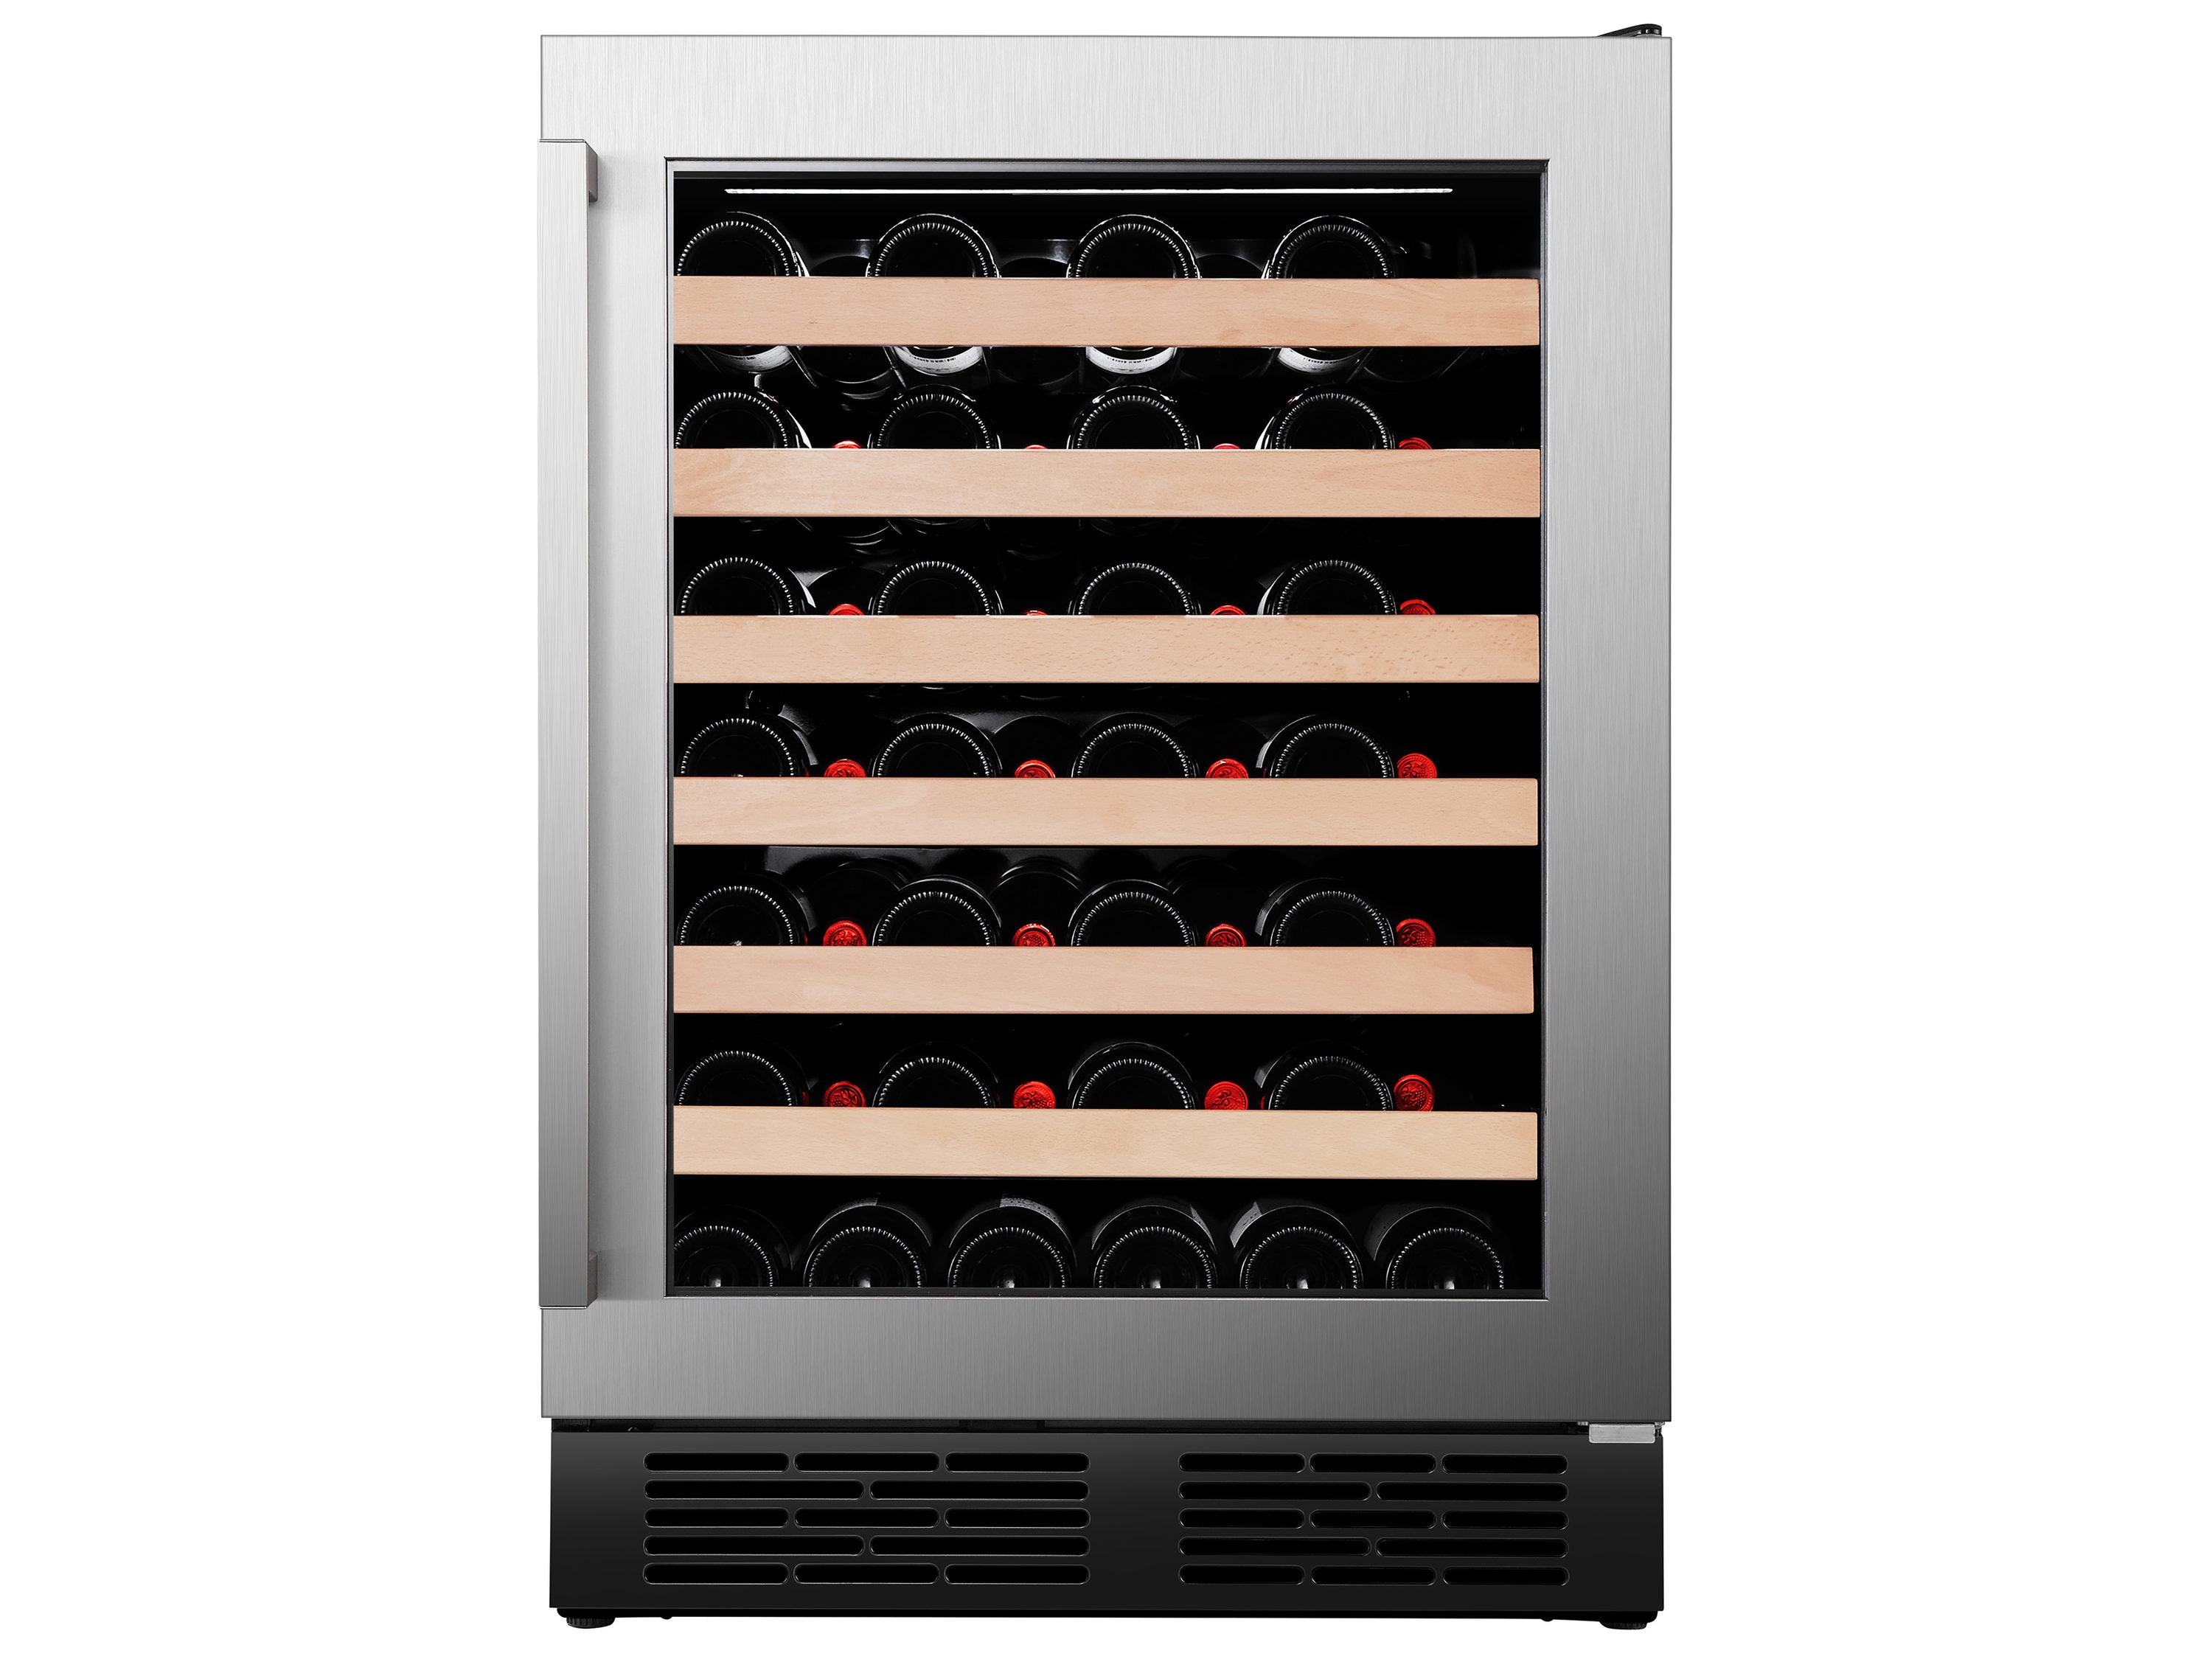 10 Best Wine Chillers for 2022 - Top-Rated Wine Chilling Products